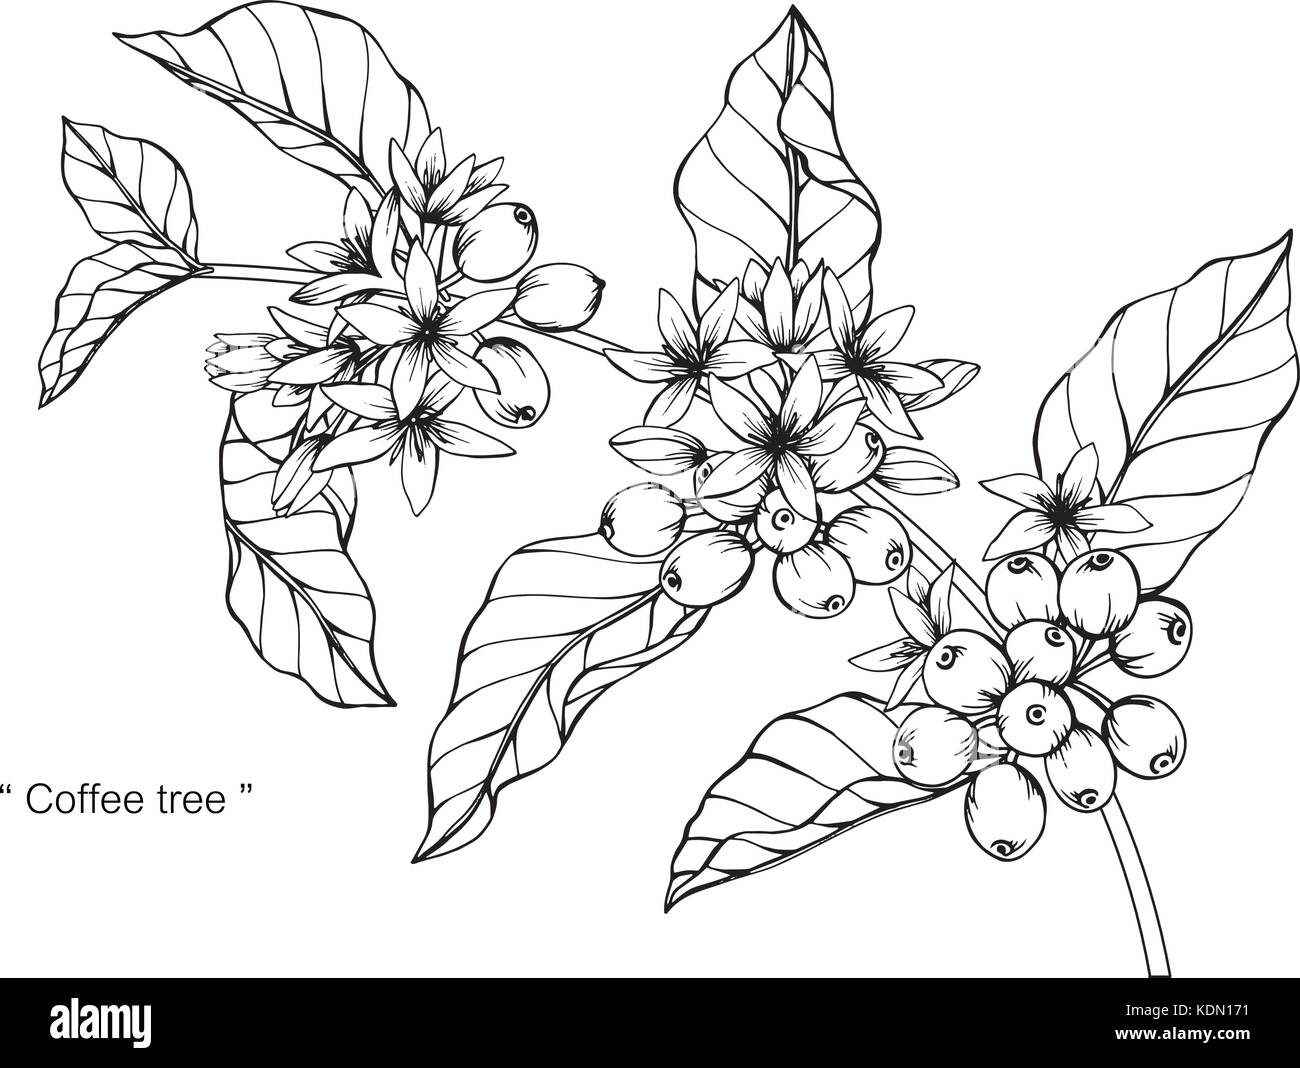 Coffee tree drawing  illustration. Black and white with line art. Stock Vector